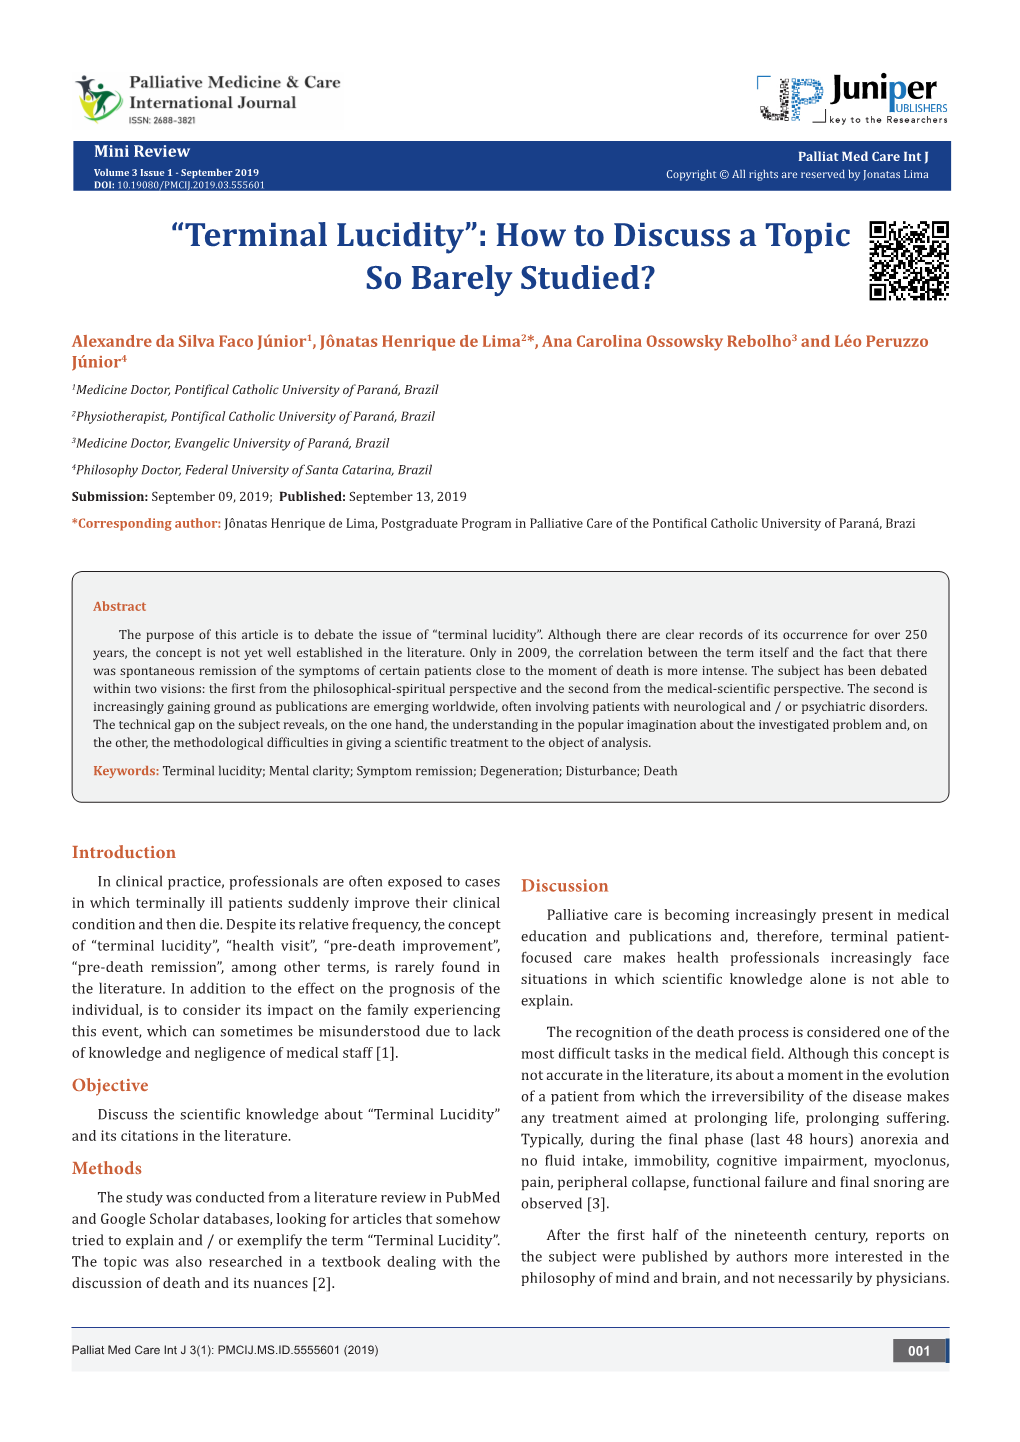 Terminal Lucidity”: How to Discuss a Topic So Barely Studied?